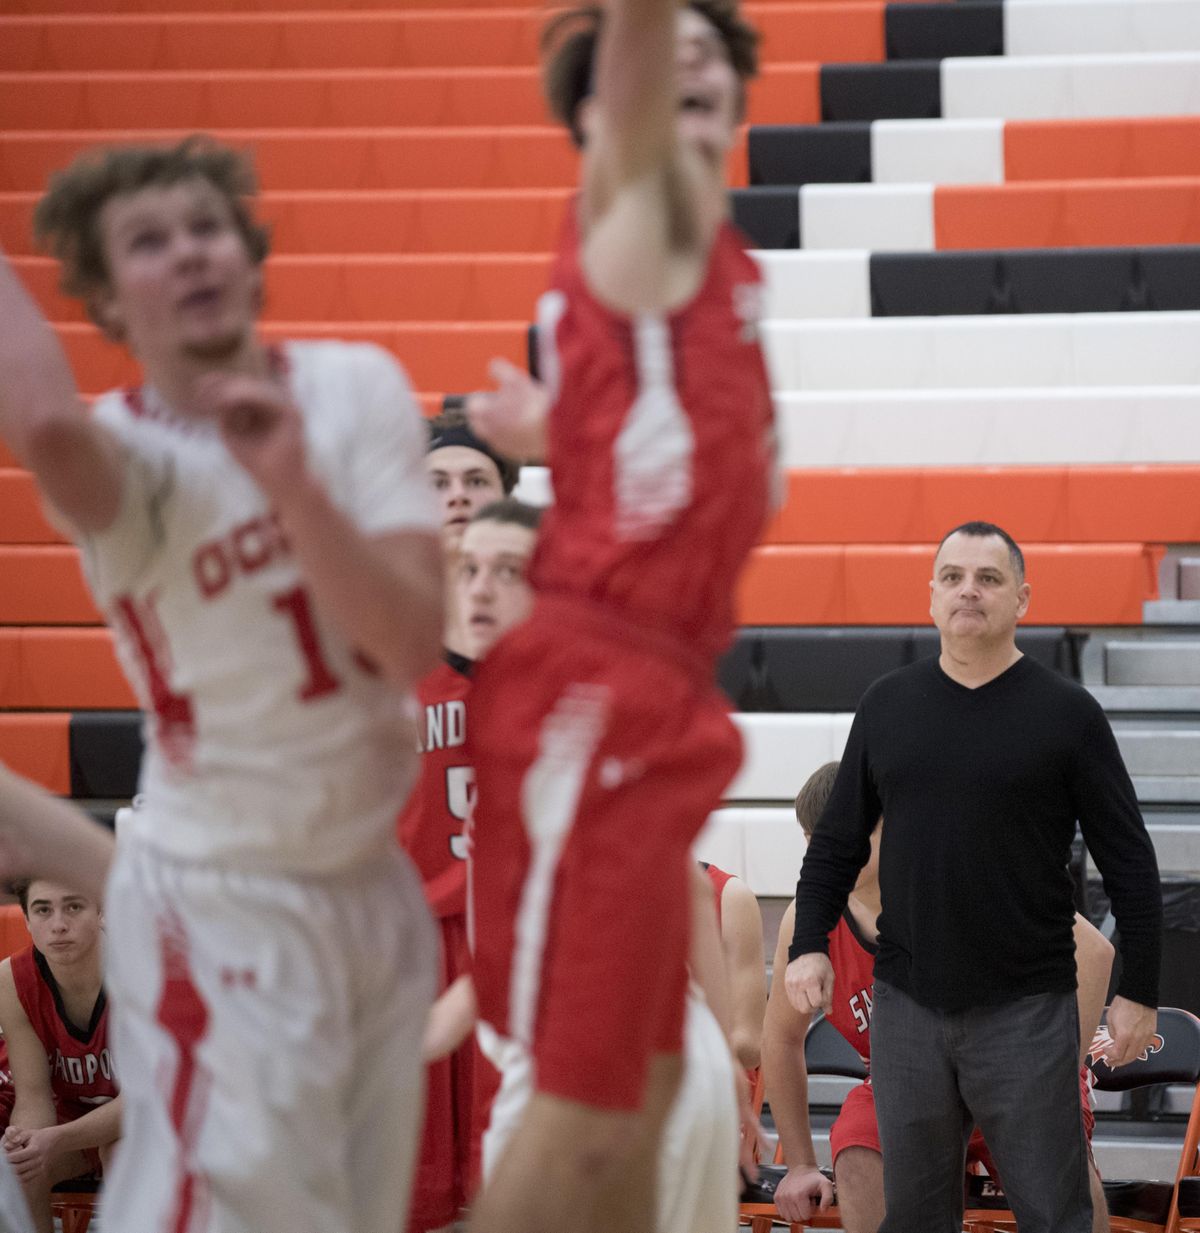 Coach Kent Leiss, right, watches his Sandpoint Bulldogs boys basketball team take on the Davenport Gorillas in the first game of the Eagle Holiday Classic, a basketball tournament for many smaller high schools around the region, Wednesday, Dec. 27, 2017 at West Valley High School. Sandpoint won the shortened game 48-45. The games continue through Friday. (Jesse Tinsley / The Spokesman-Review)